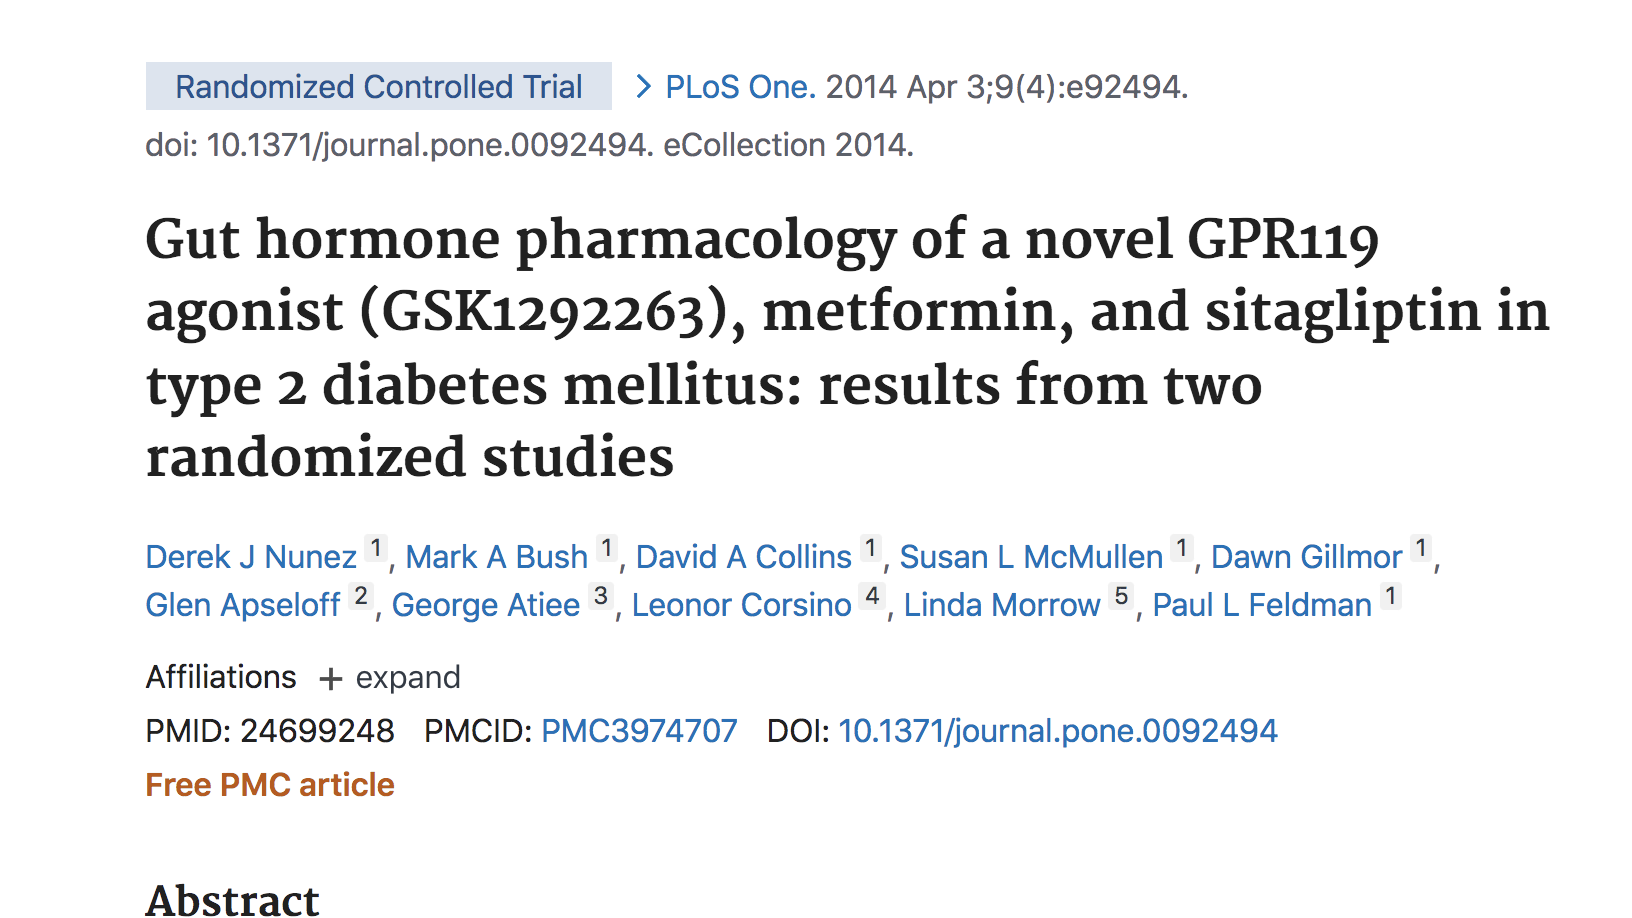 image of Gut hormone pharmacology of a novel GPR119 agonist (GSK1292263), metformin, and sitagliptin in type 2 diabetes mellitus: results from two randomized studies.